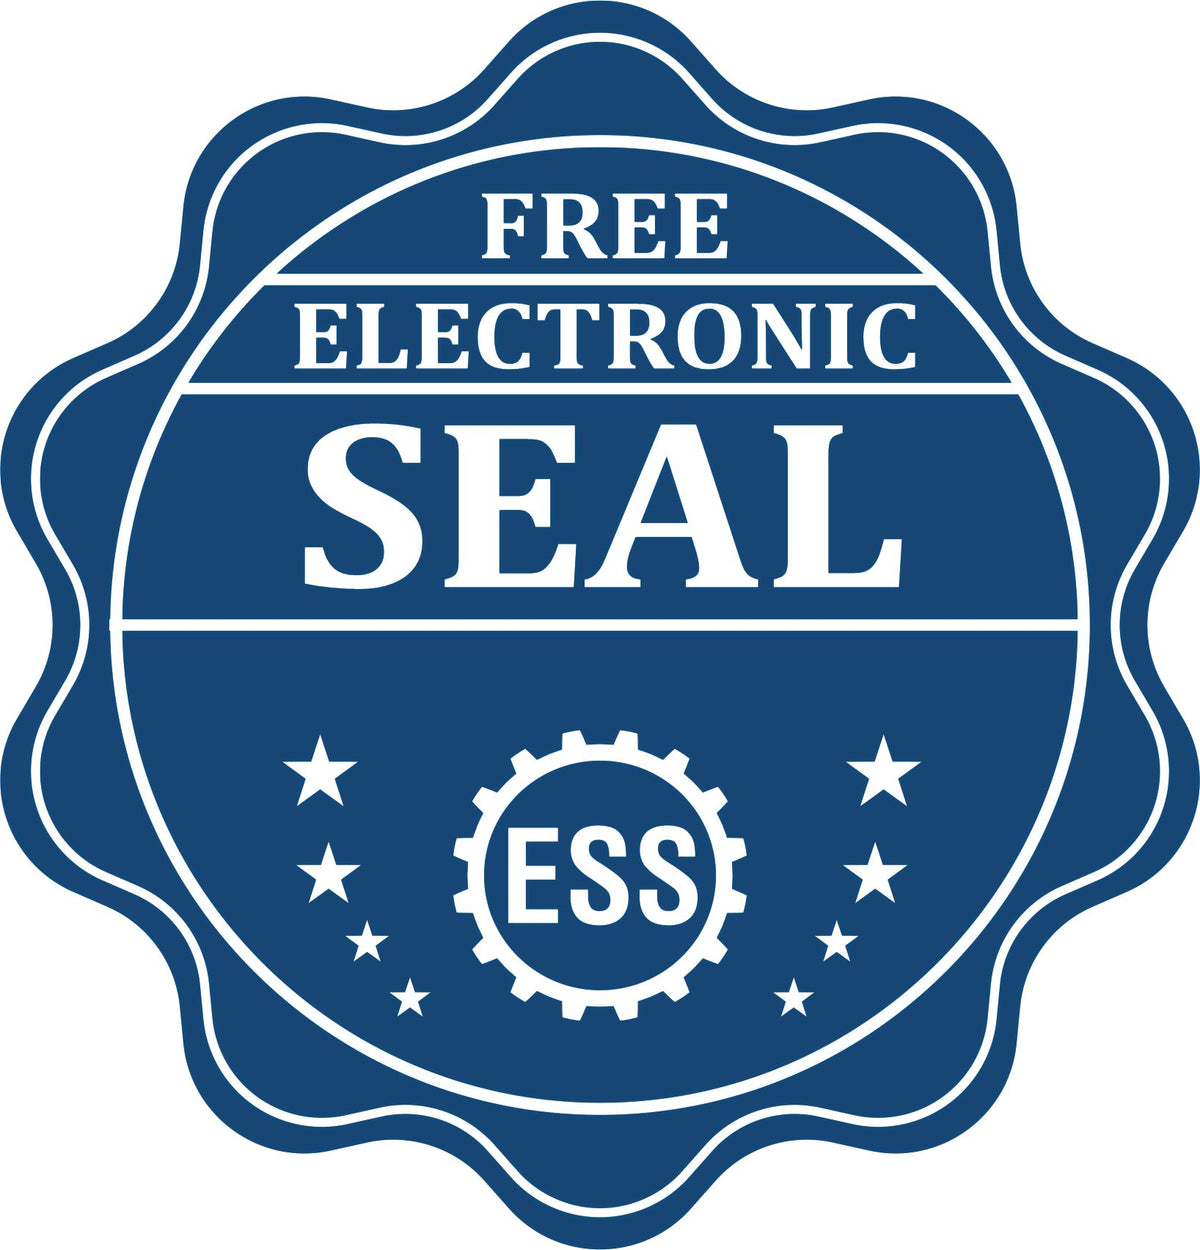 A badge showing a free electronic seal for the PSI New York Notary Stamp with stars and the ESS gear on the emblem.